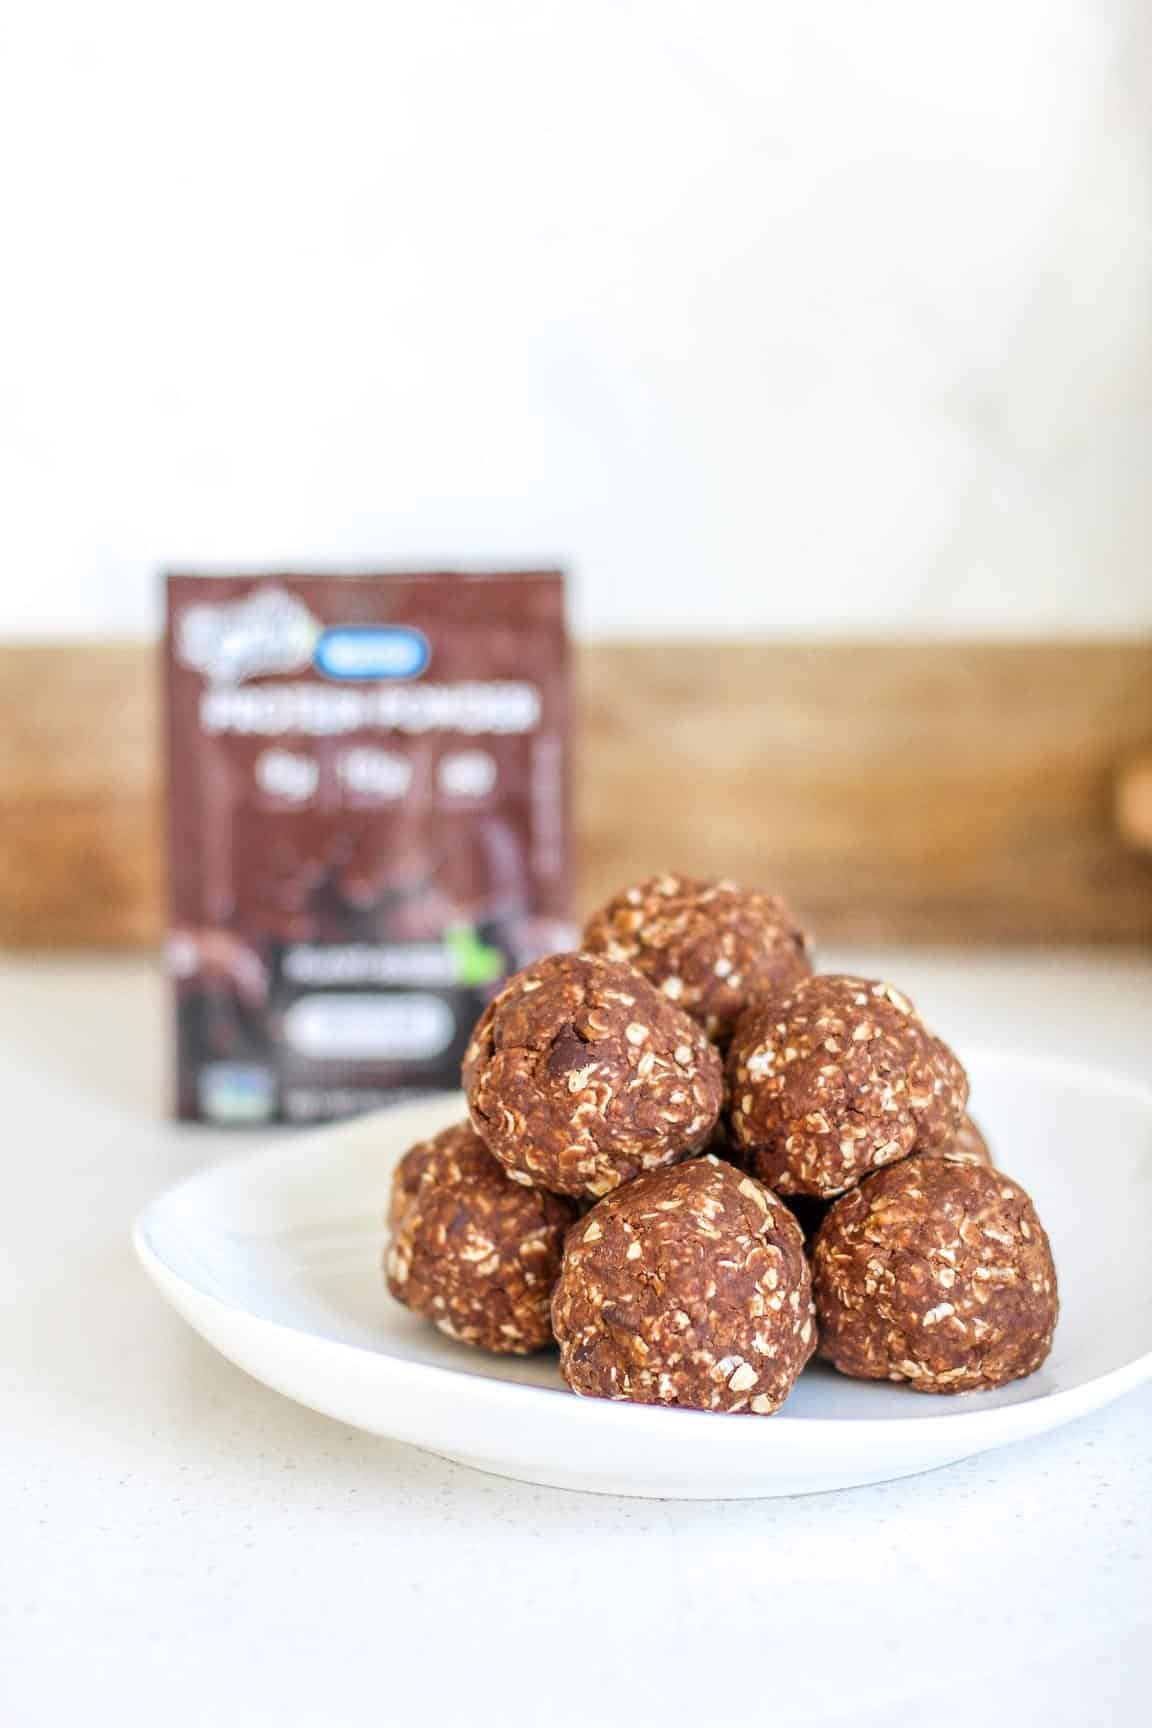 Chocolate Peanut Protein Bites with chocolate protein